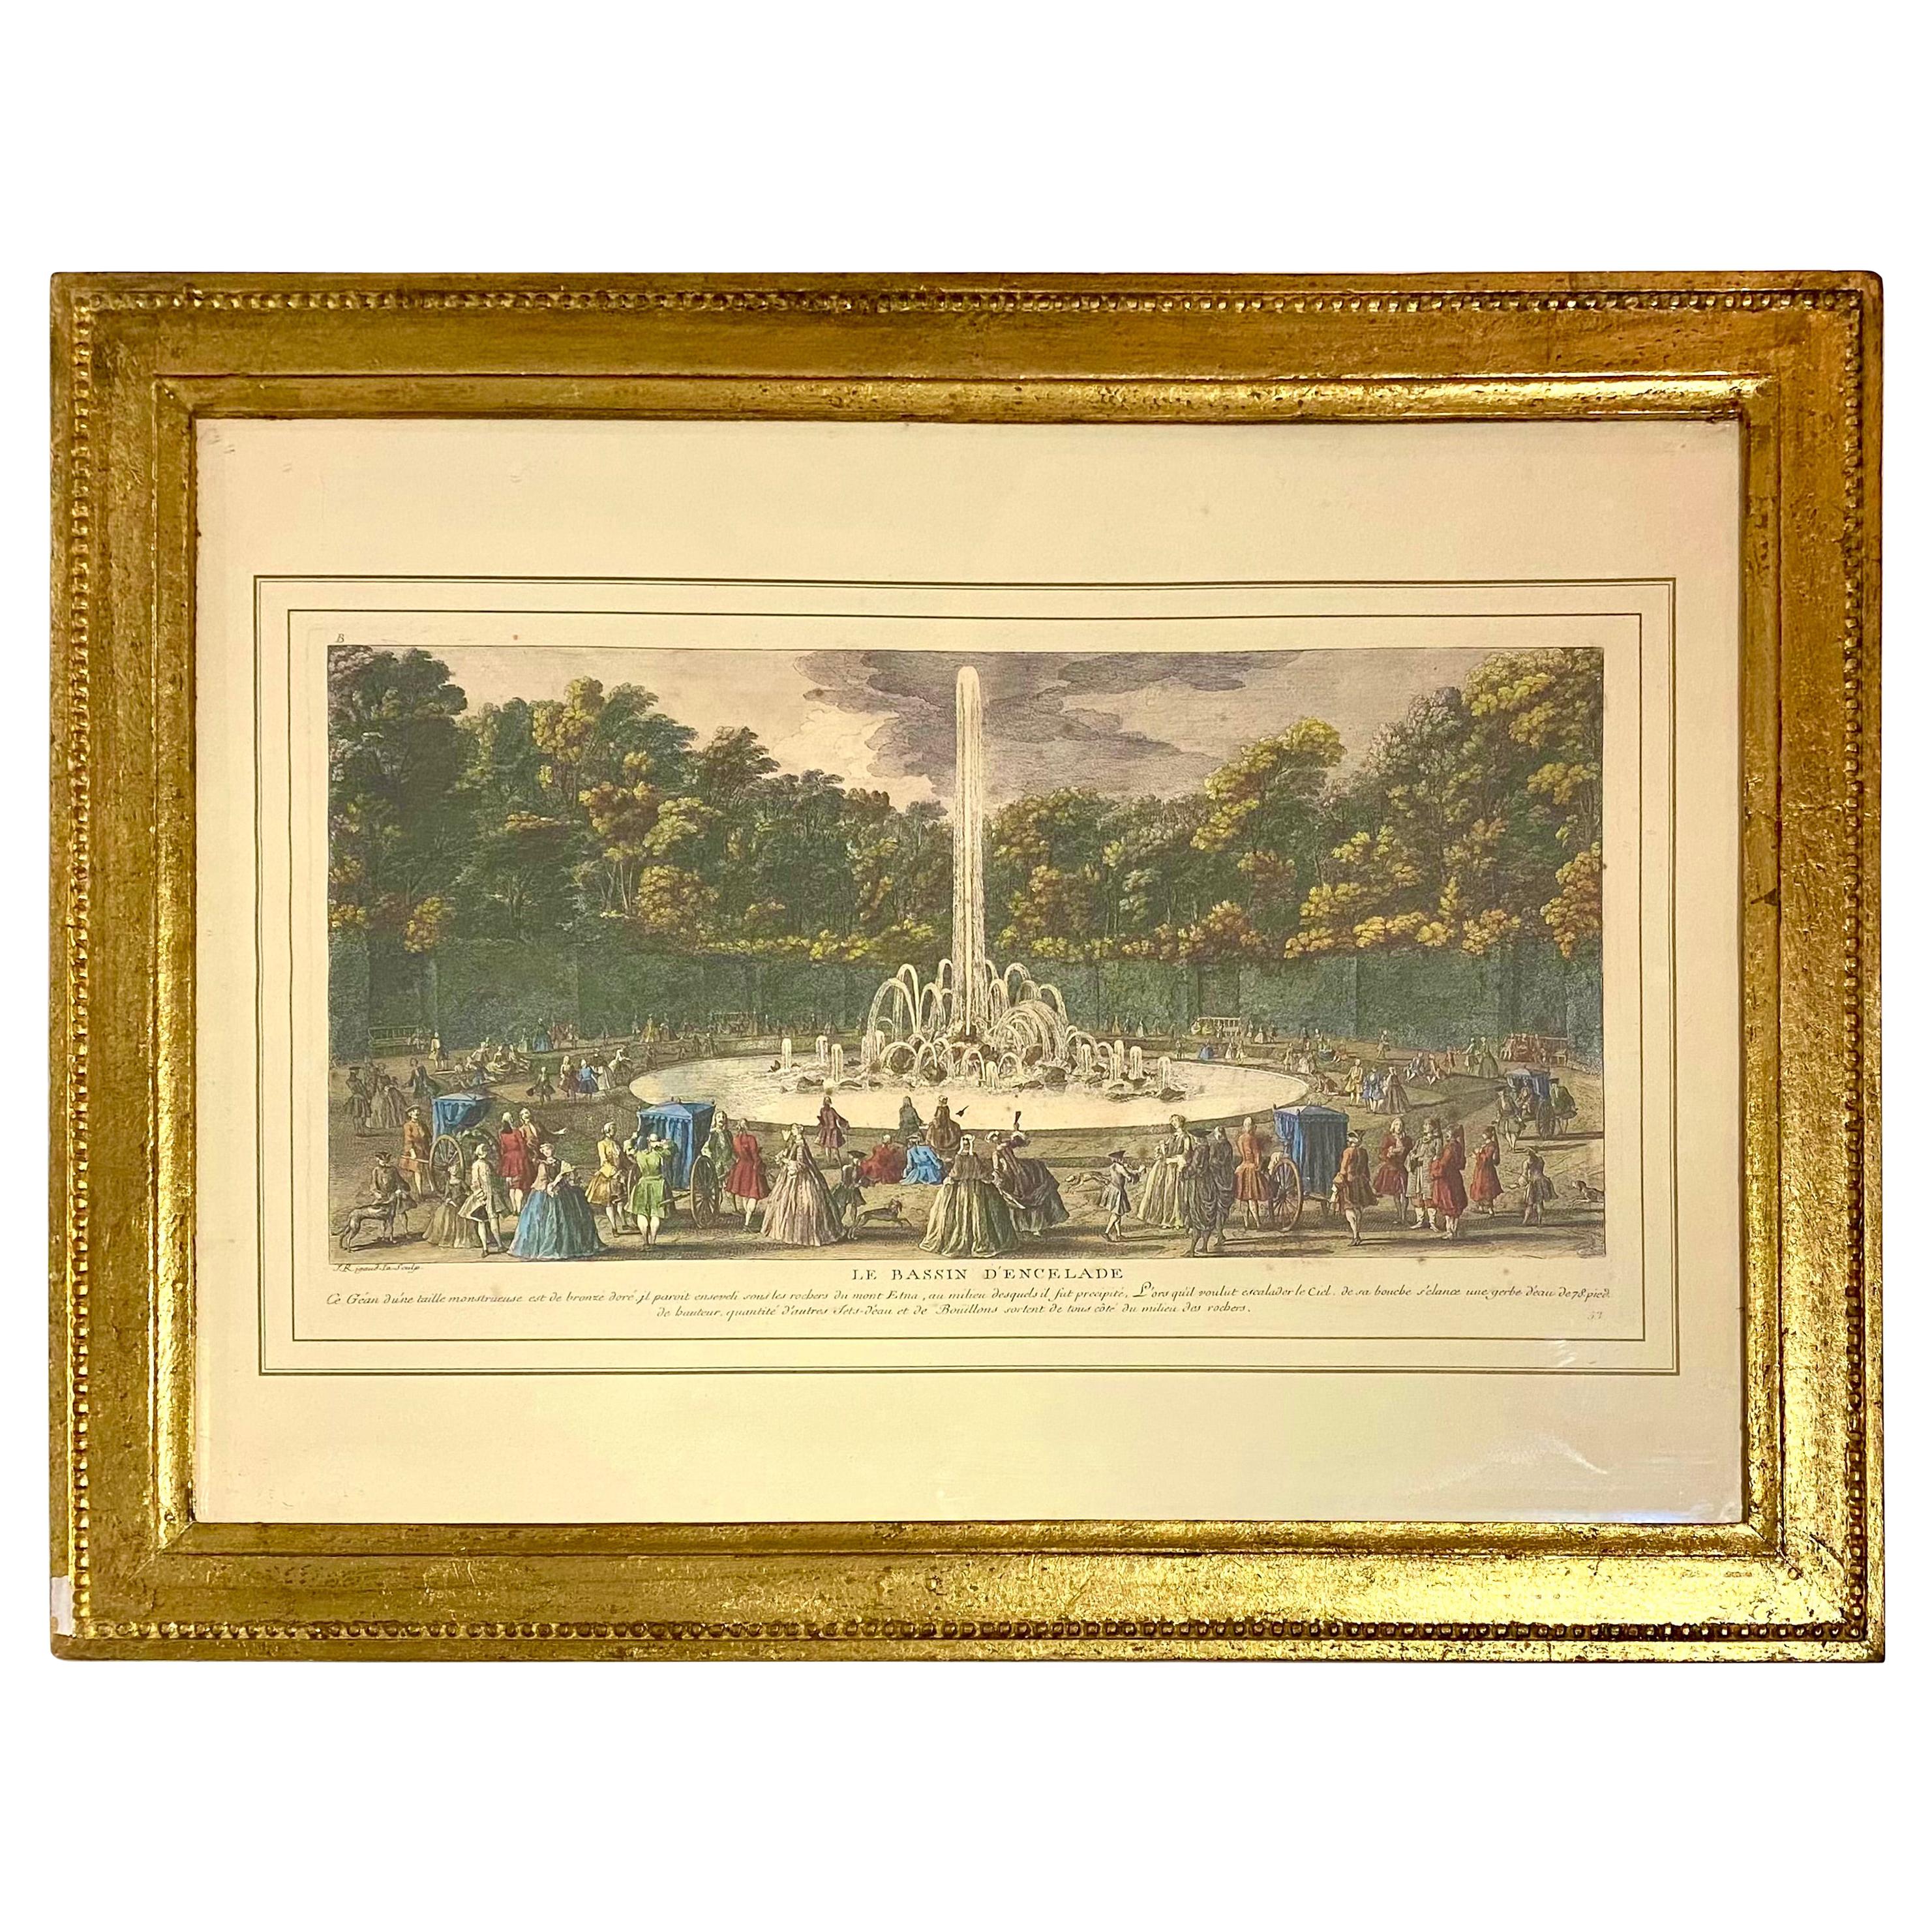 Large Framed French Etching of Versailles, Le Bassin d’Encelade